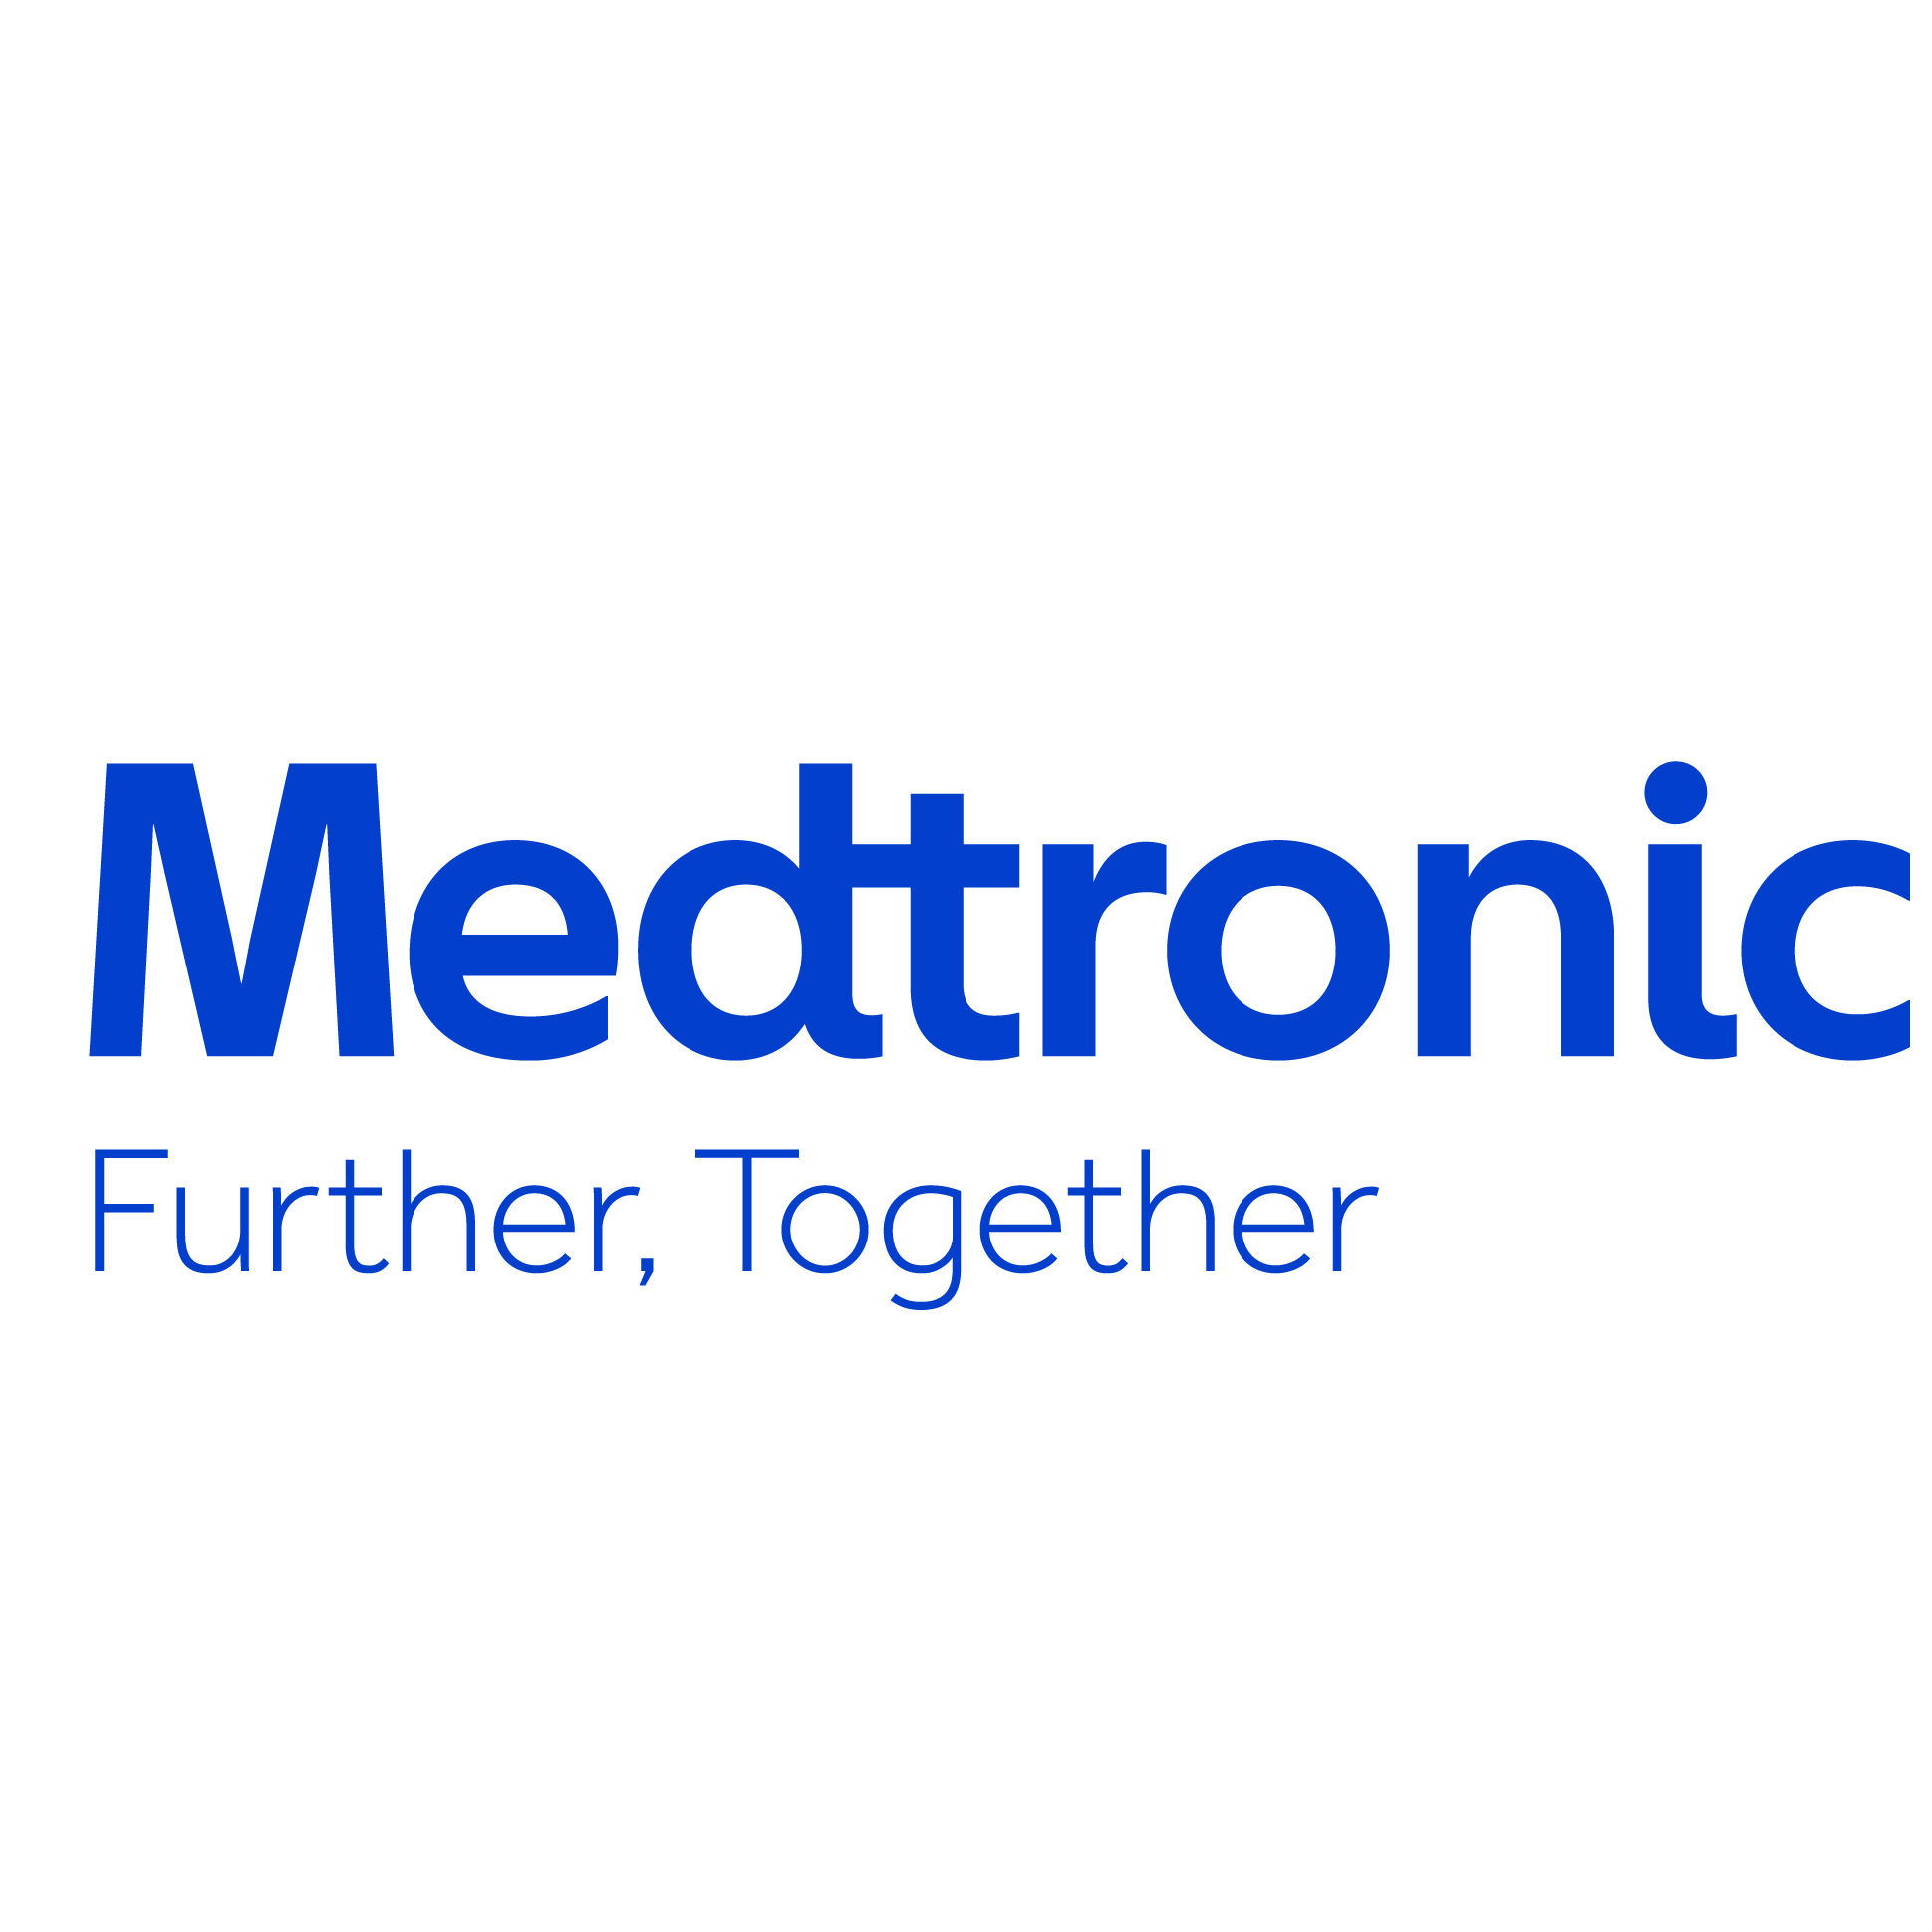 Medtronic. Further. Together